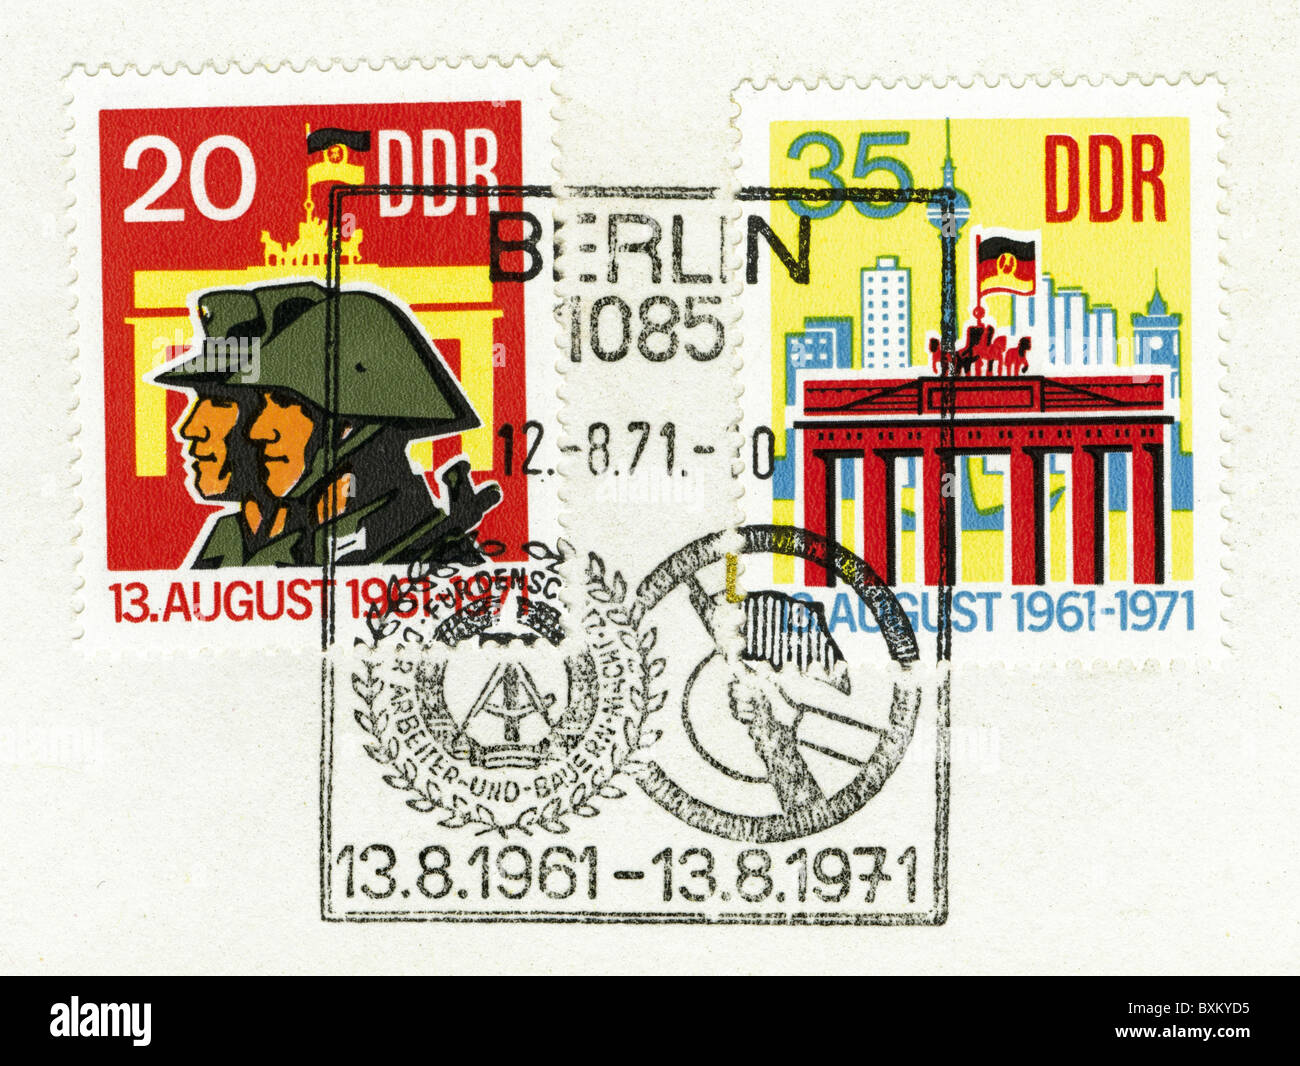 mail / post, postage stamps, commemorative stamp with special stamp, Berlin, East-Germany, 13.8.1971, Additional-Rights-Clearences-Not Available Stock Photo